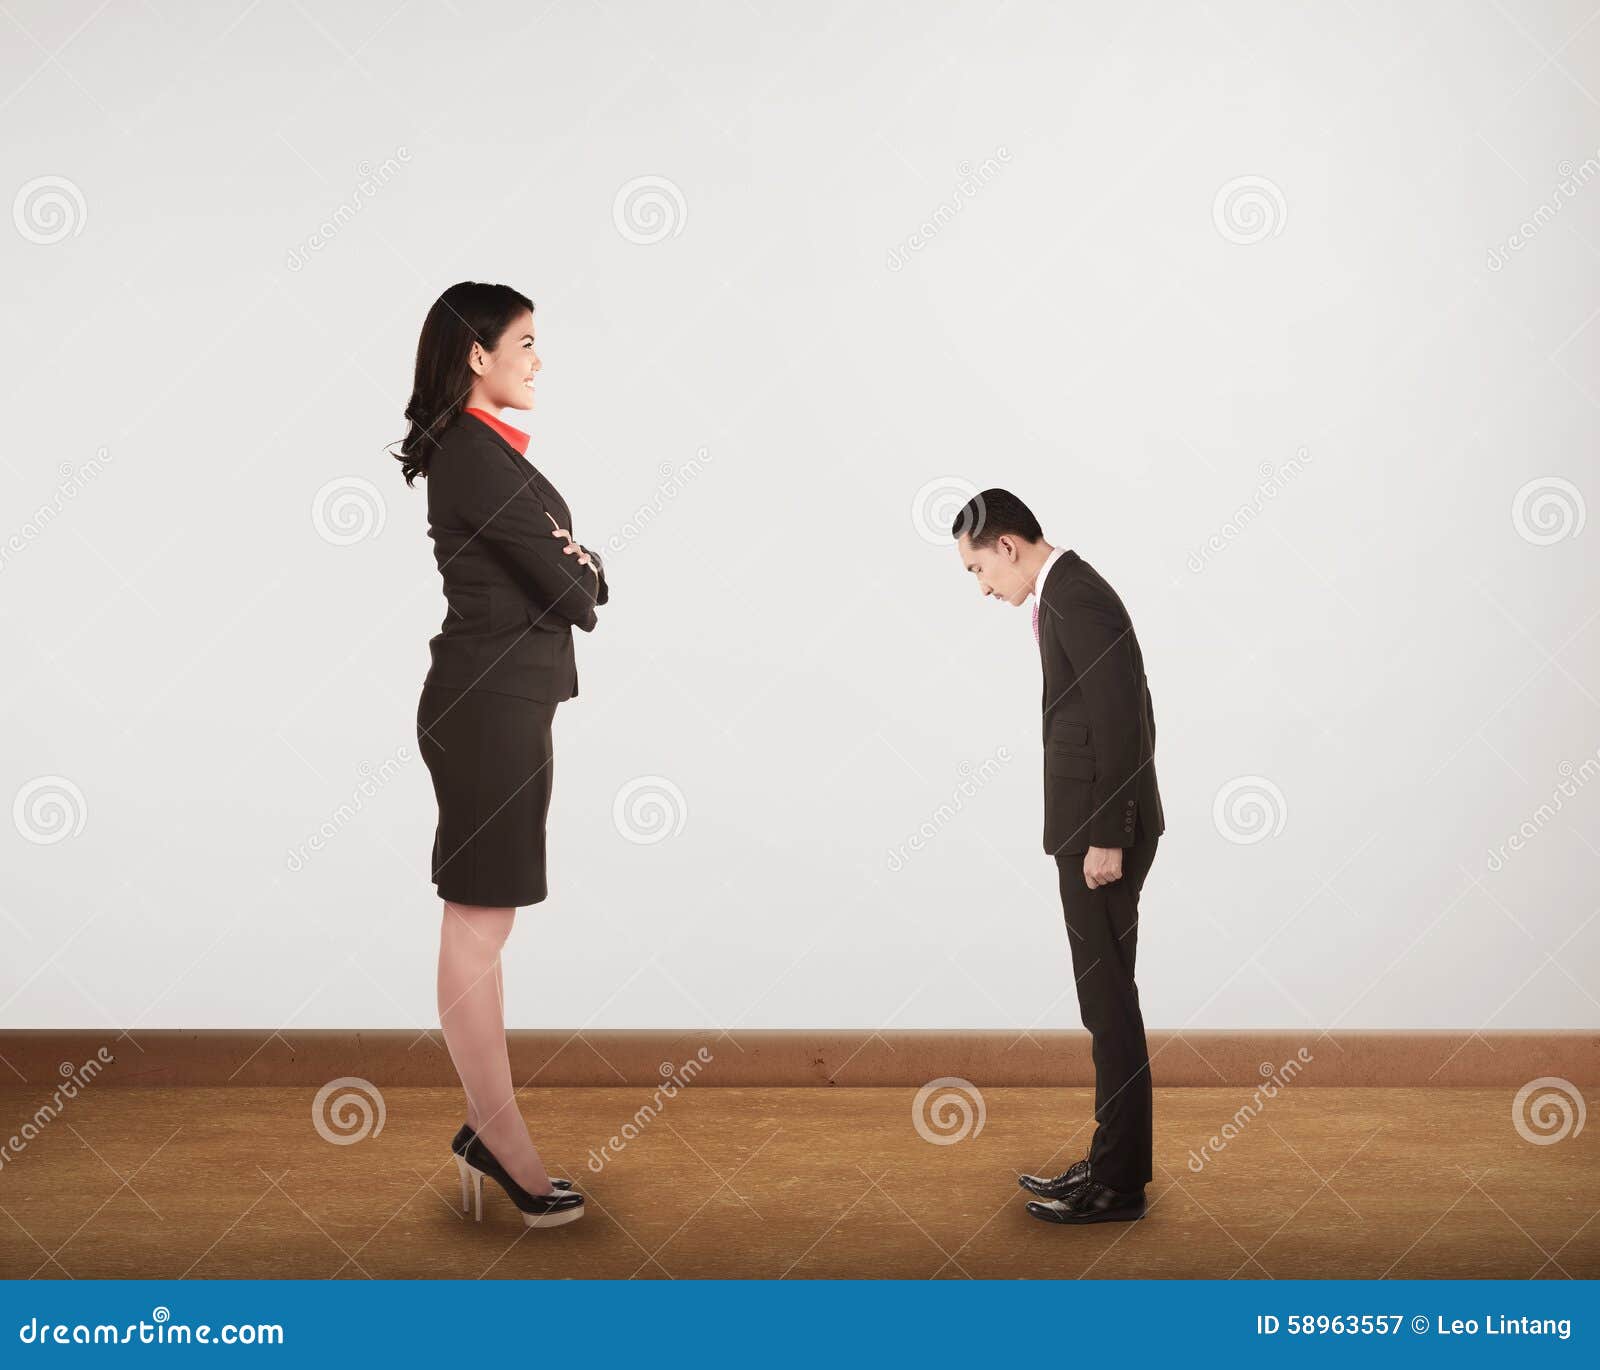 Boss Domination At Work Sexual Harassment Concept With Man And Woman In Office Stock Image 